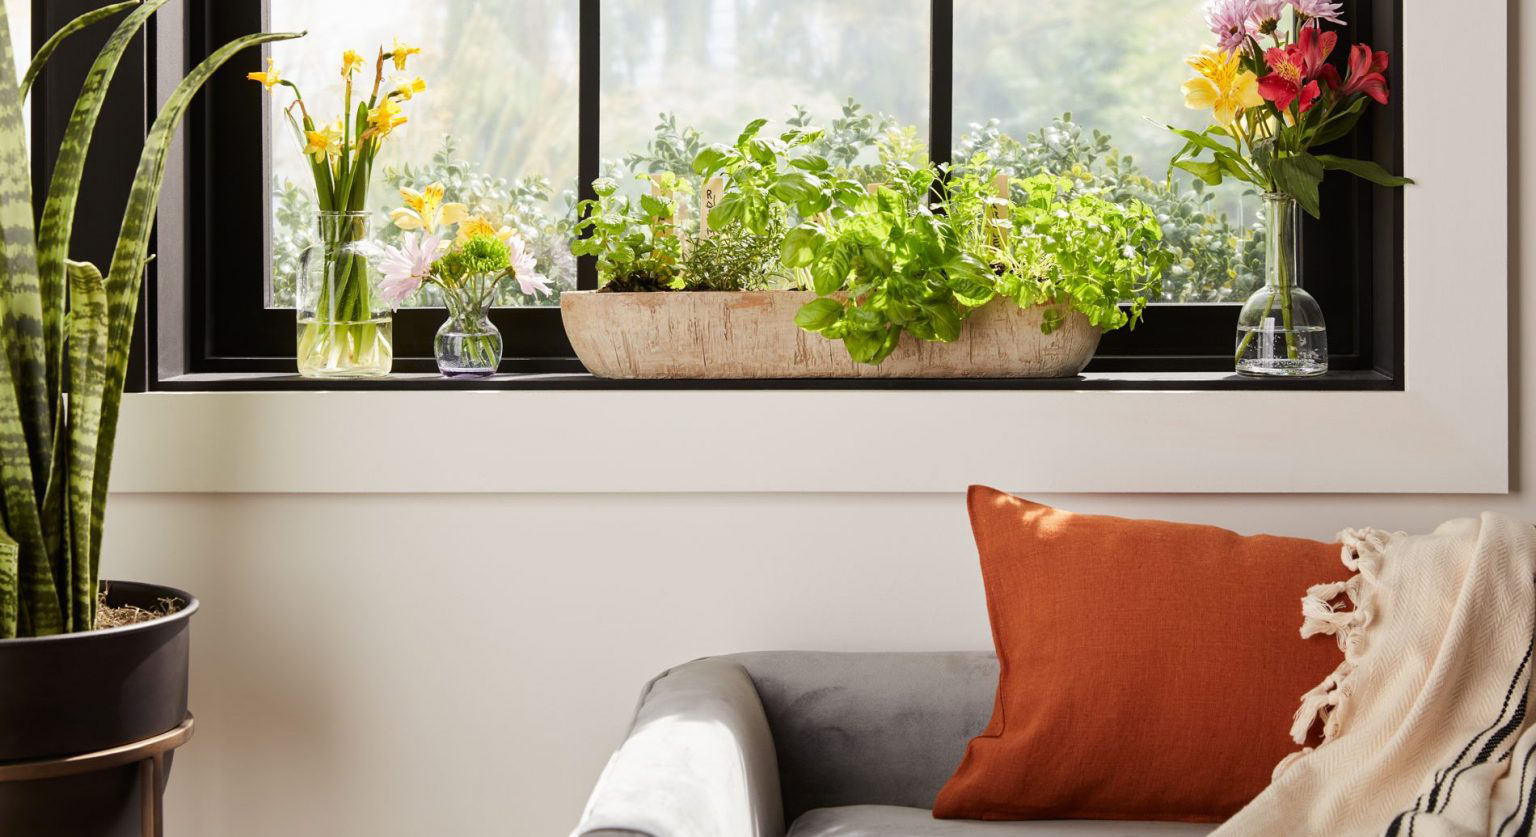 A window sill filled with plants.